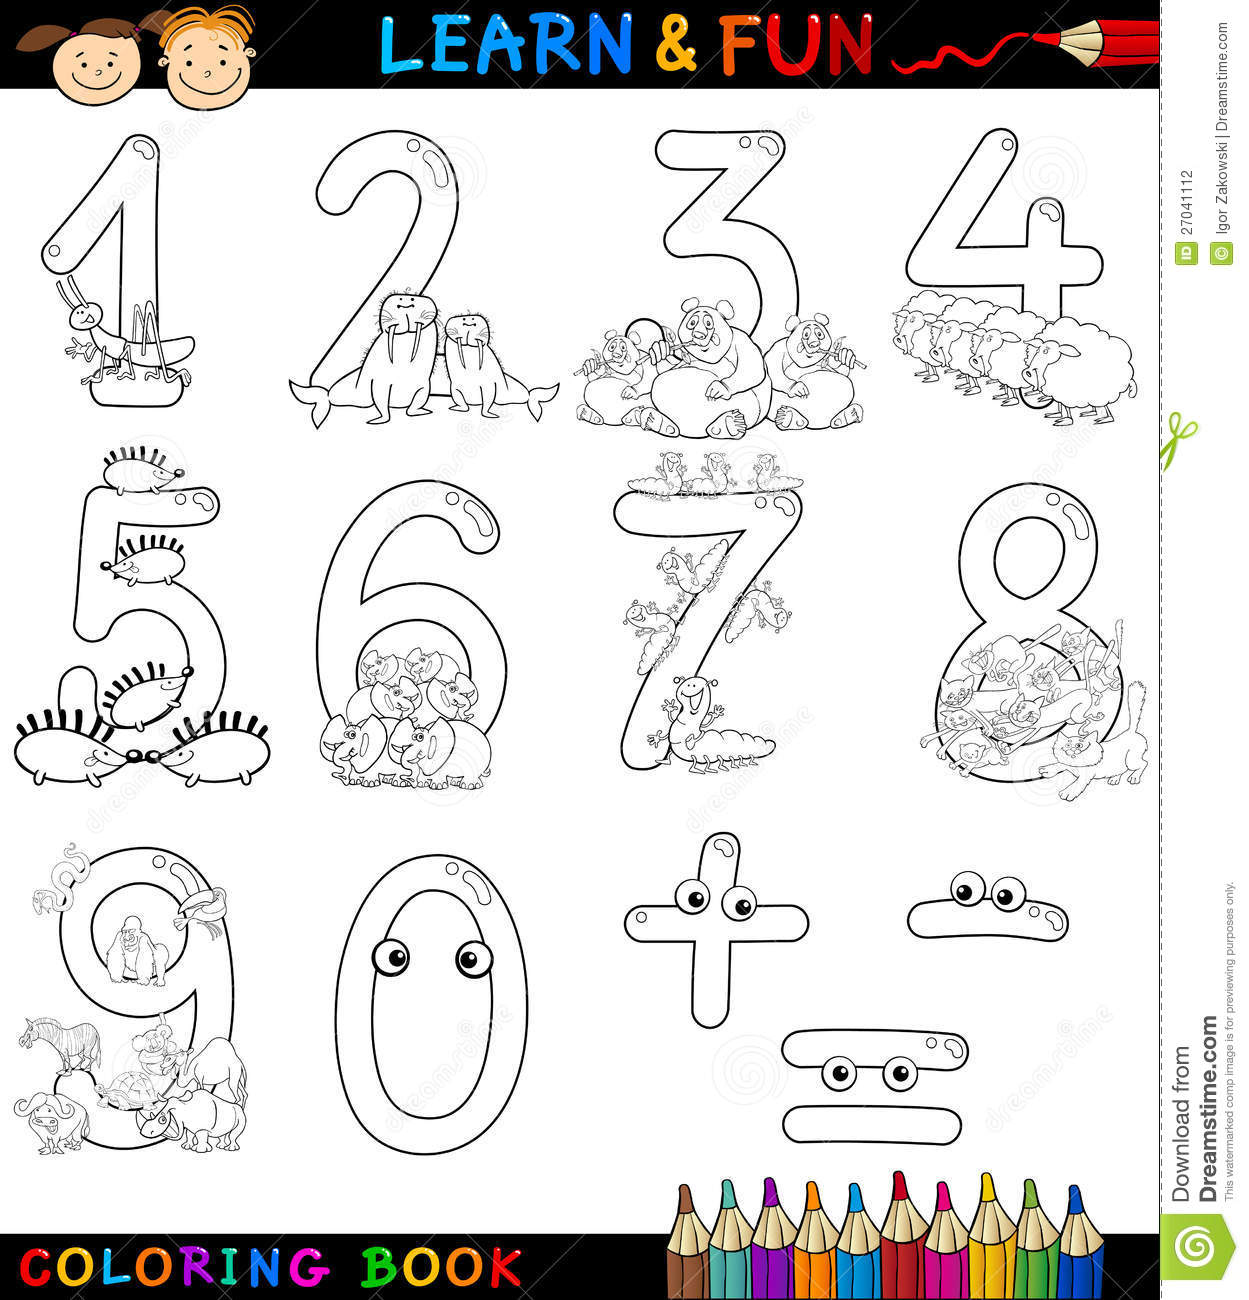 Numbers Signs From Zero To Nine With Animals Characters For Children